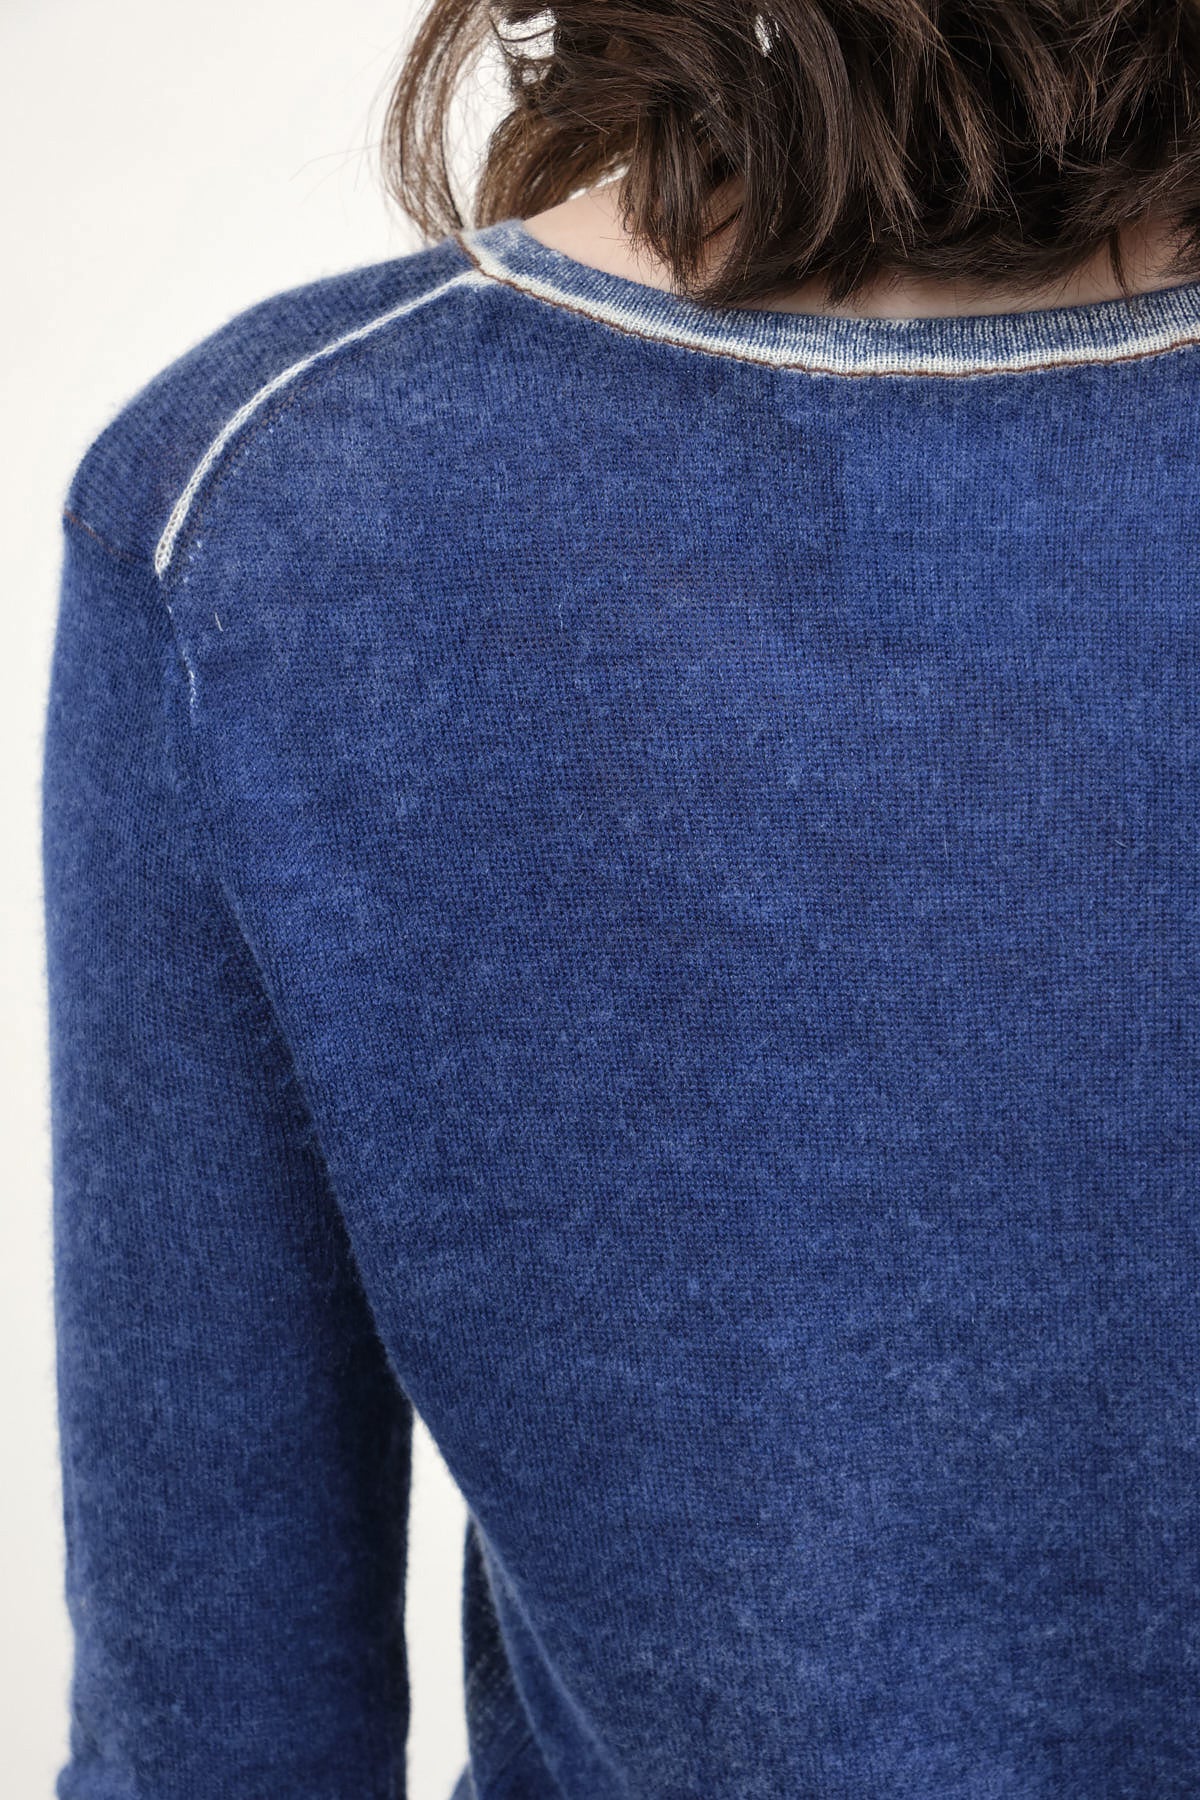 Back details on L/S Printed Crew in Navy Sky